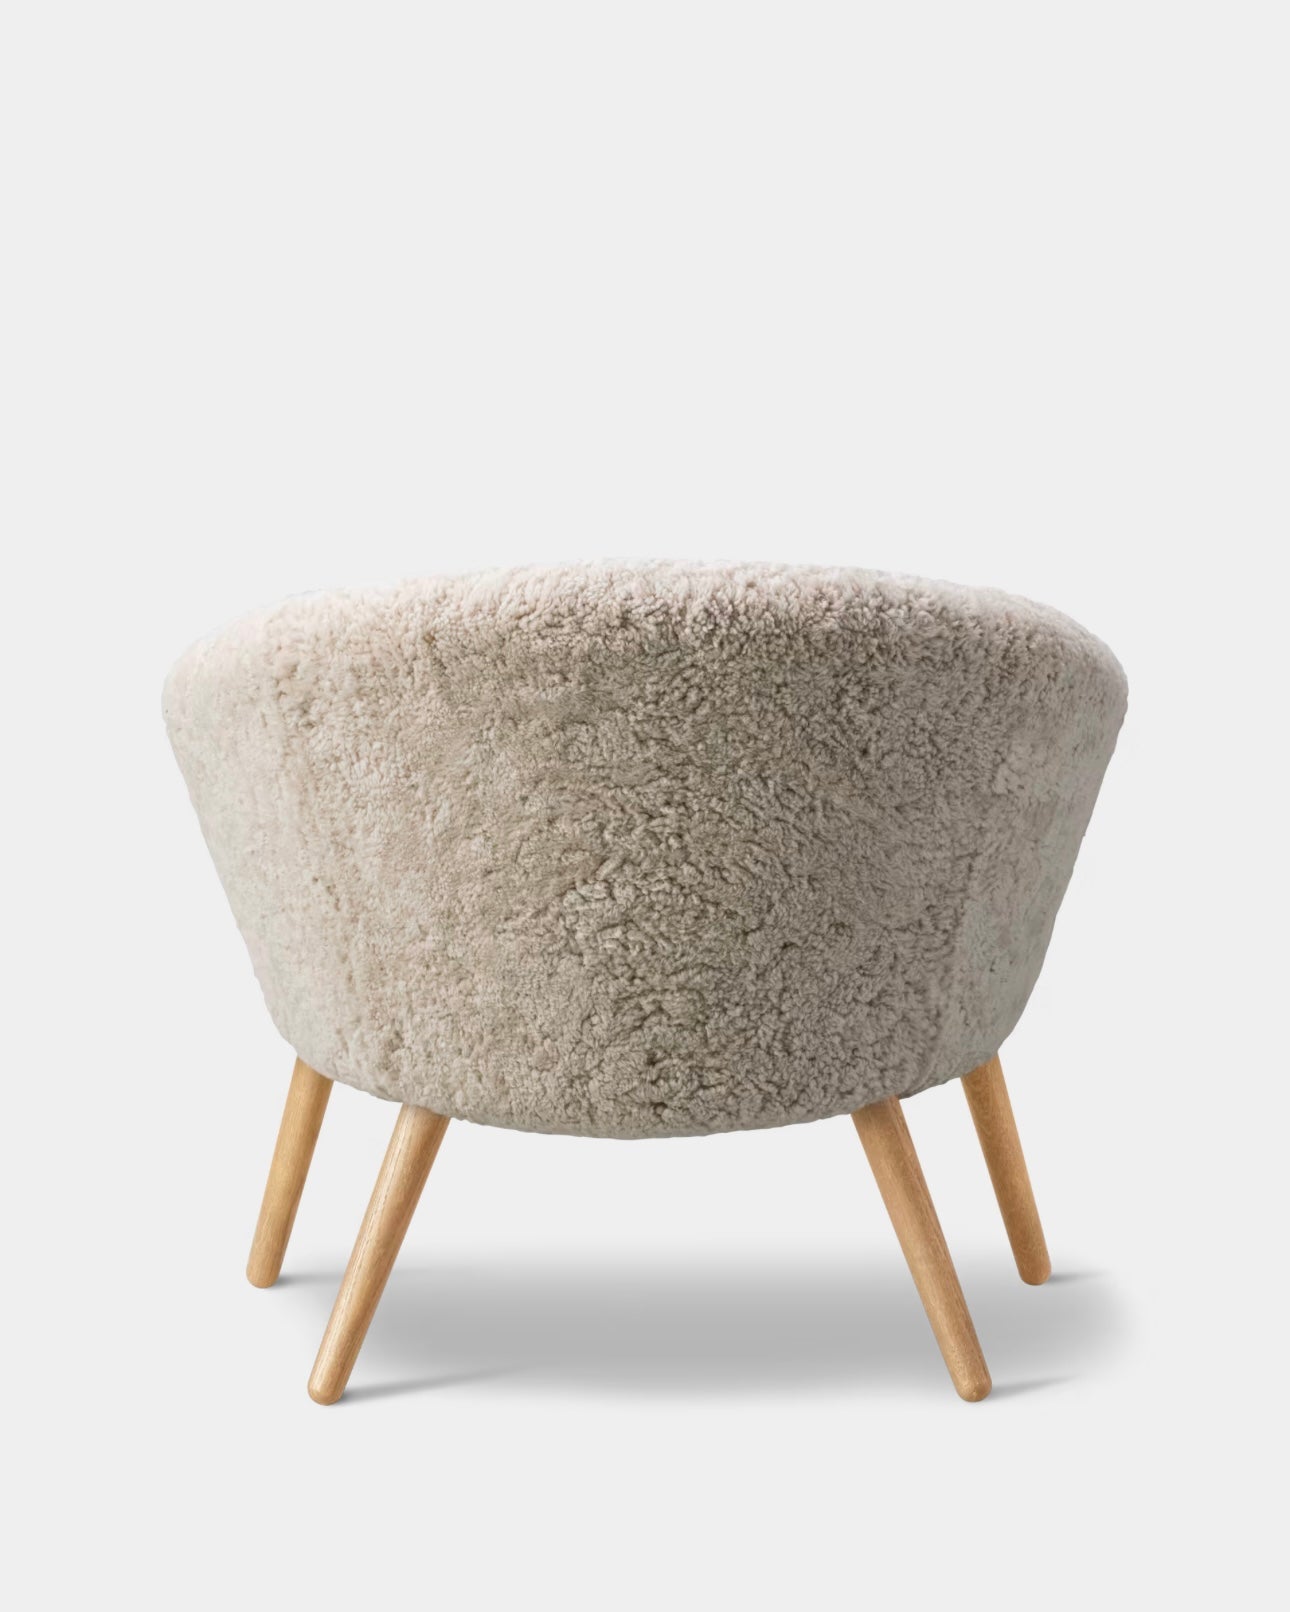 Ditzel Lounge Chair | Sheepskin and Lacquered Wood